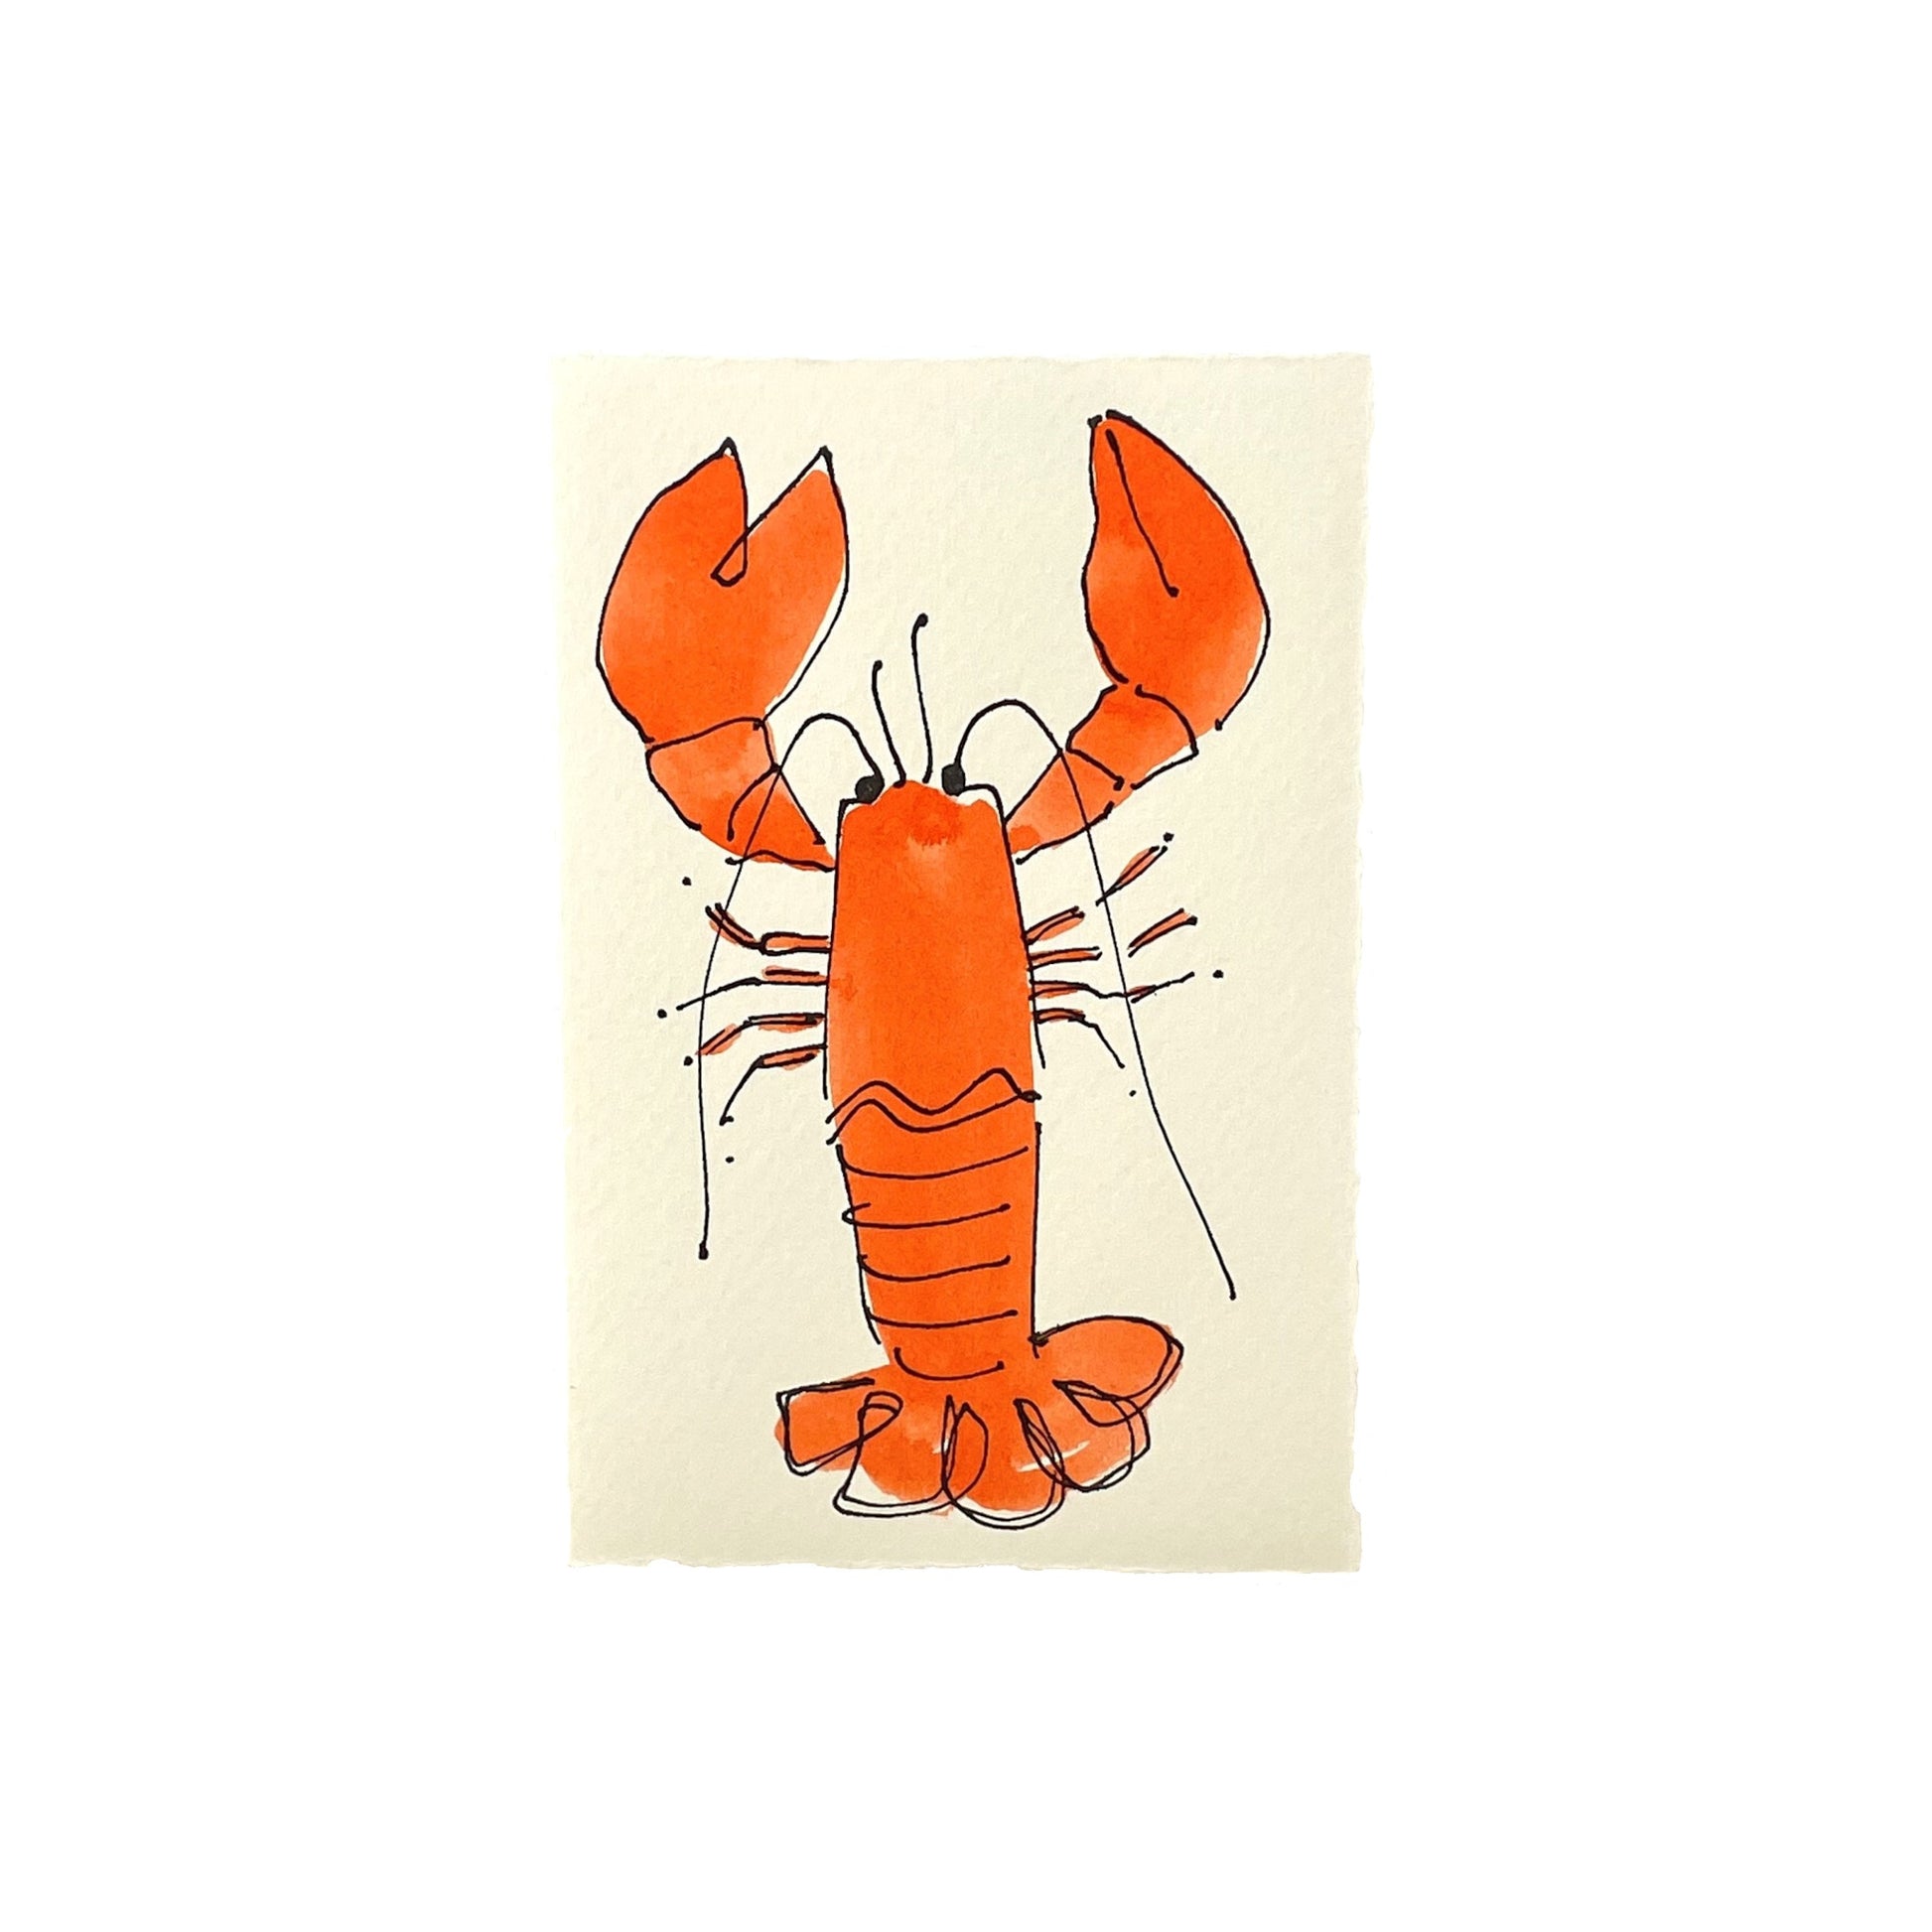 hand-painted greetings card of an orange lobster, by Scribble and Daub